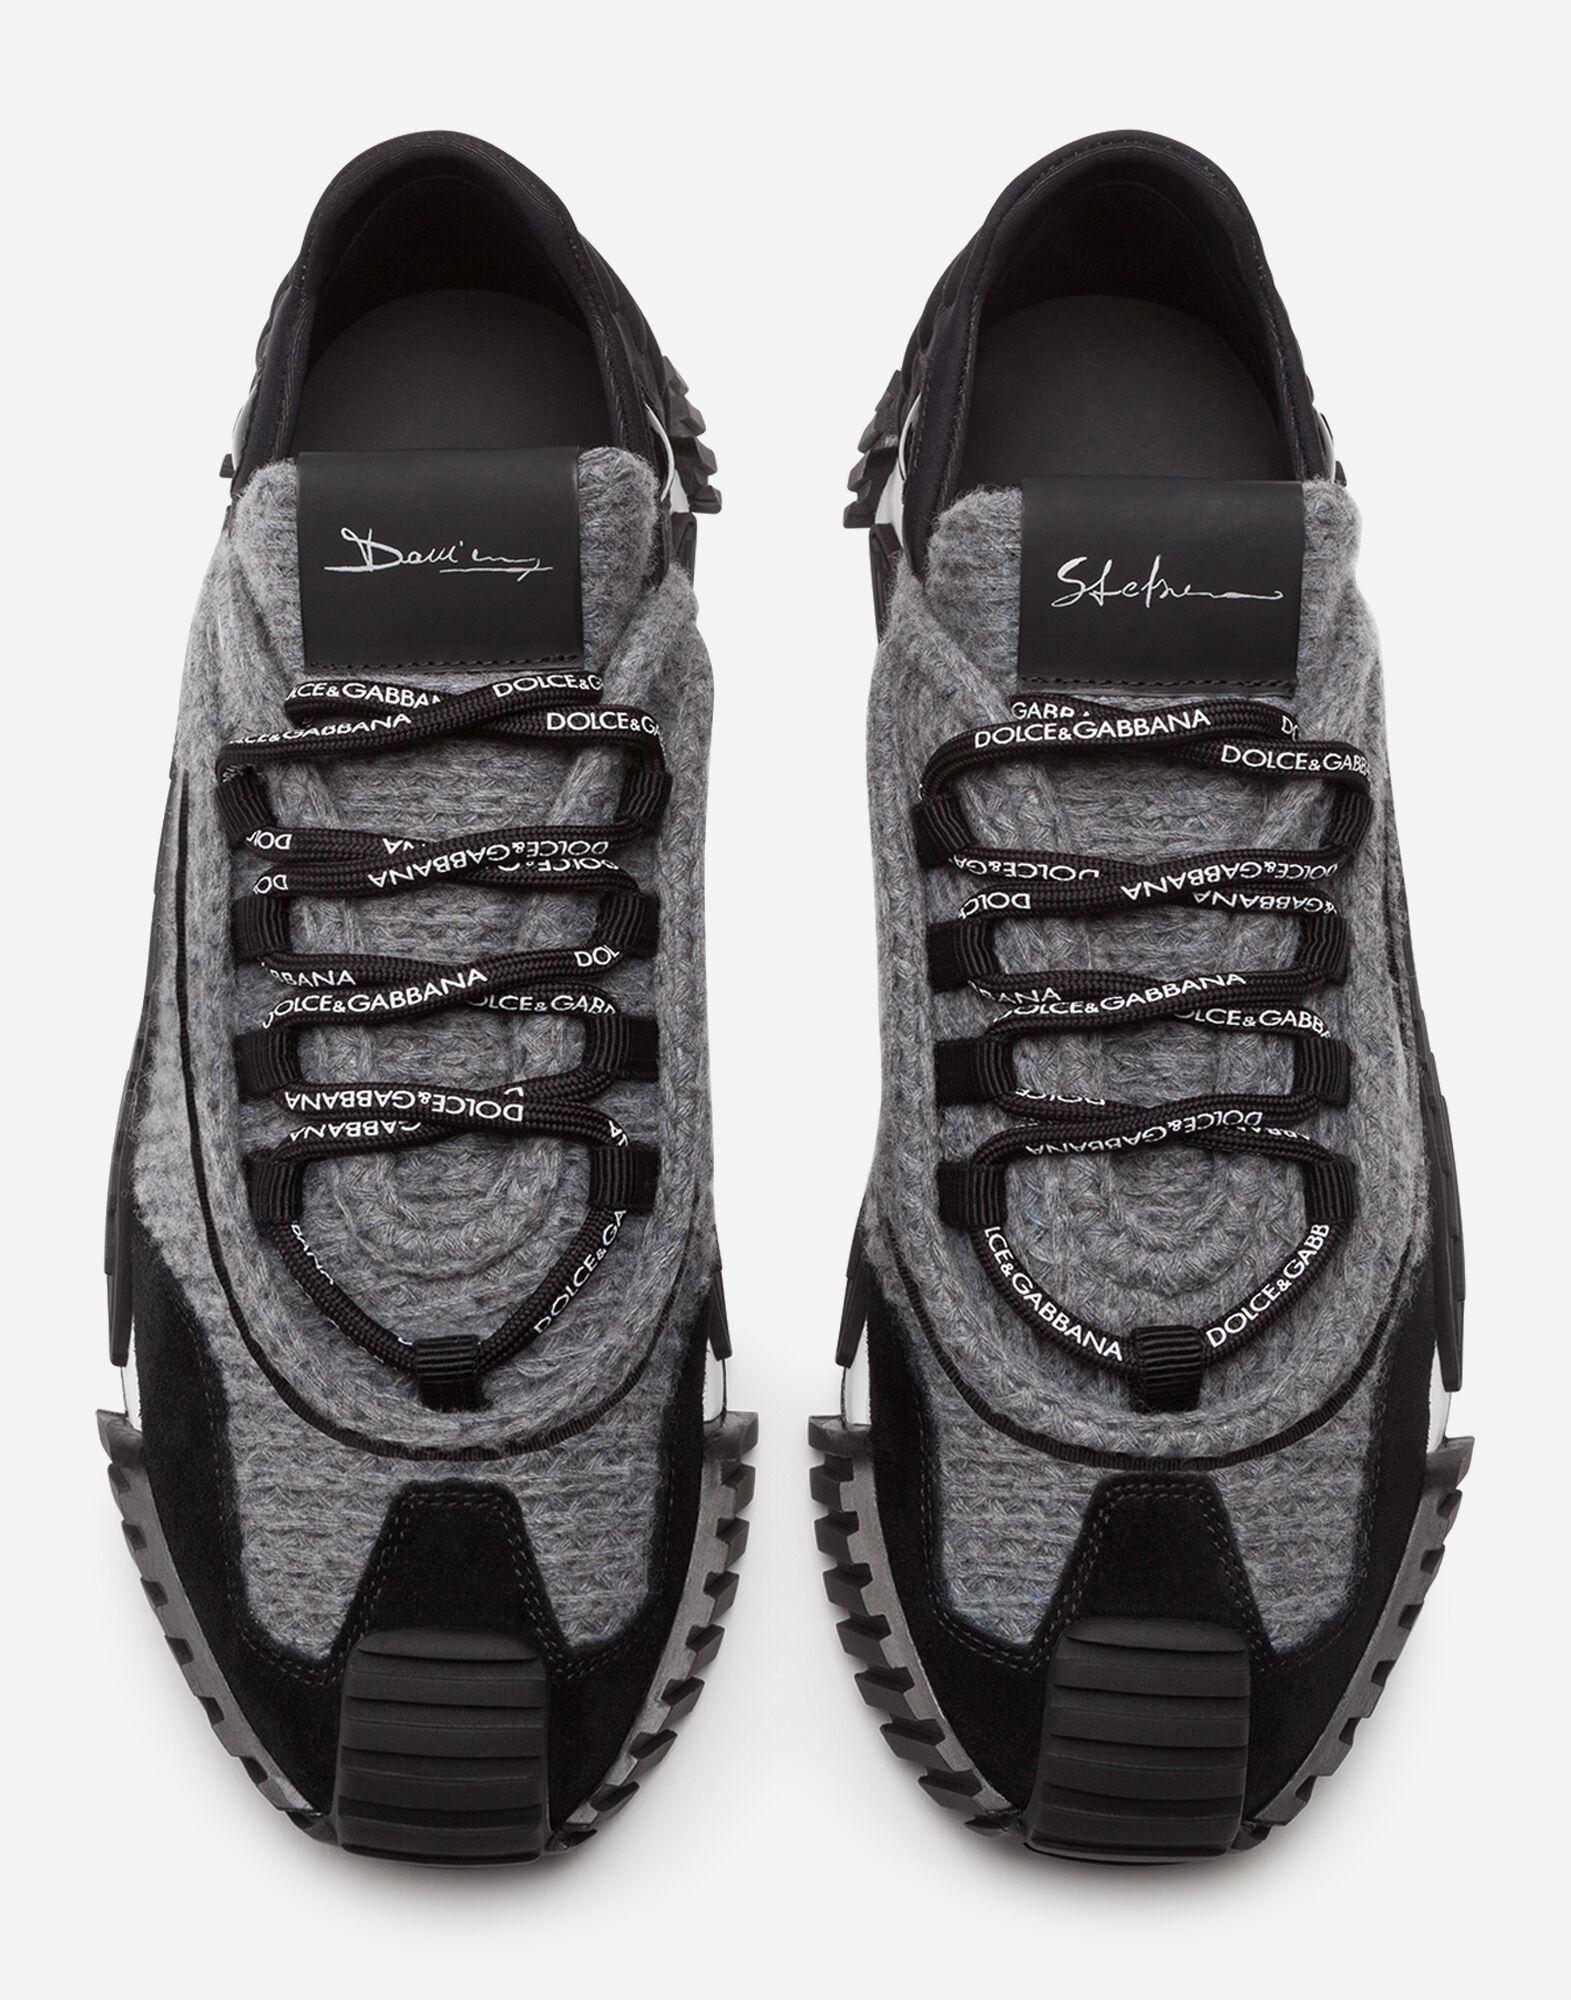 Dolce & Gabbana Rubber #dglimited Ns1 Sneakers in Black for Men - Lyst